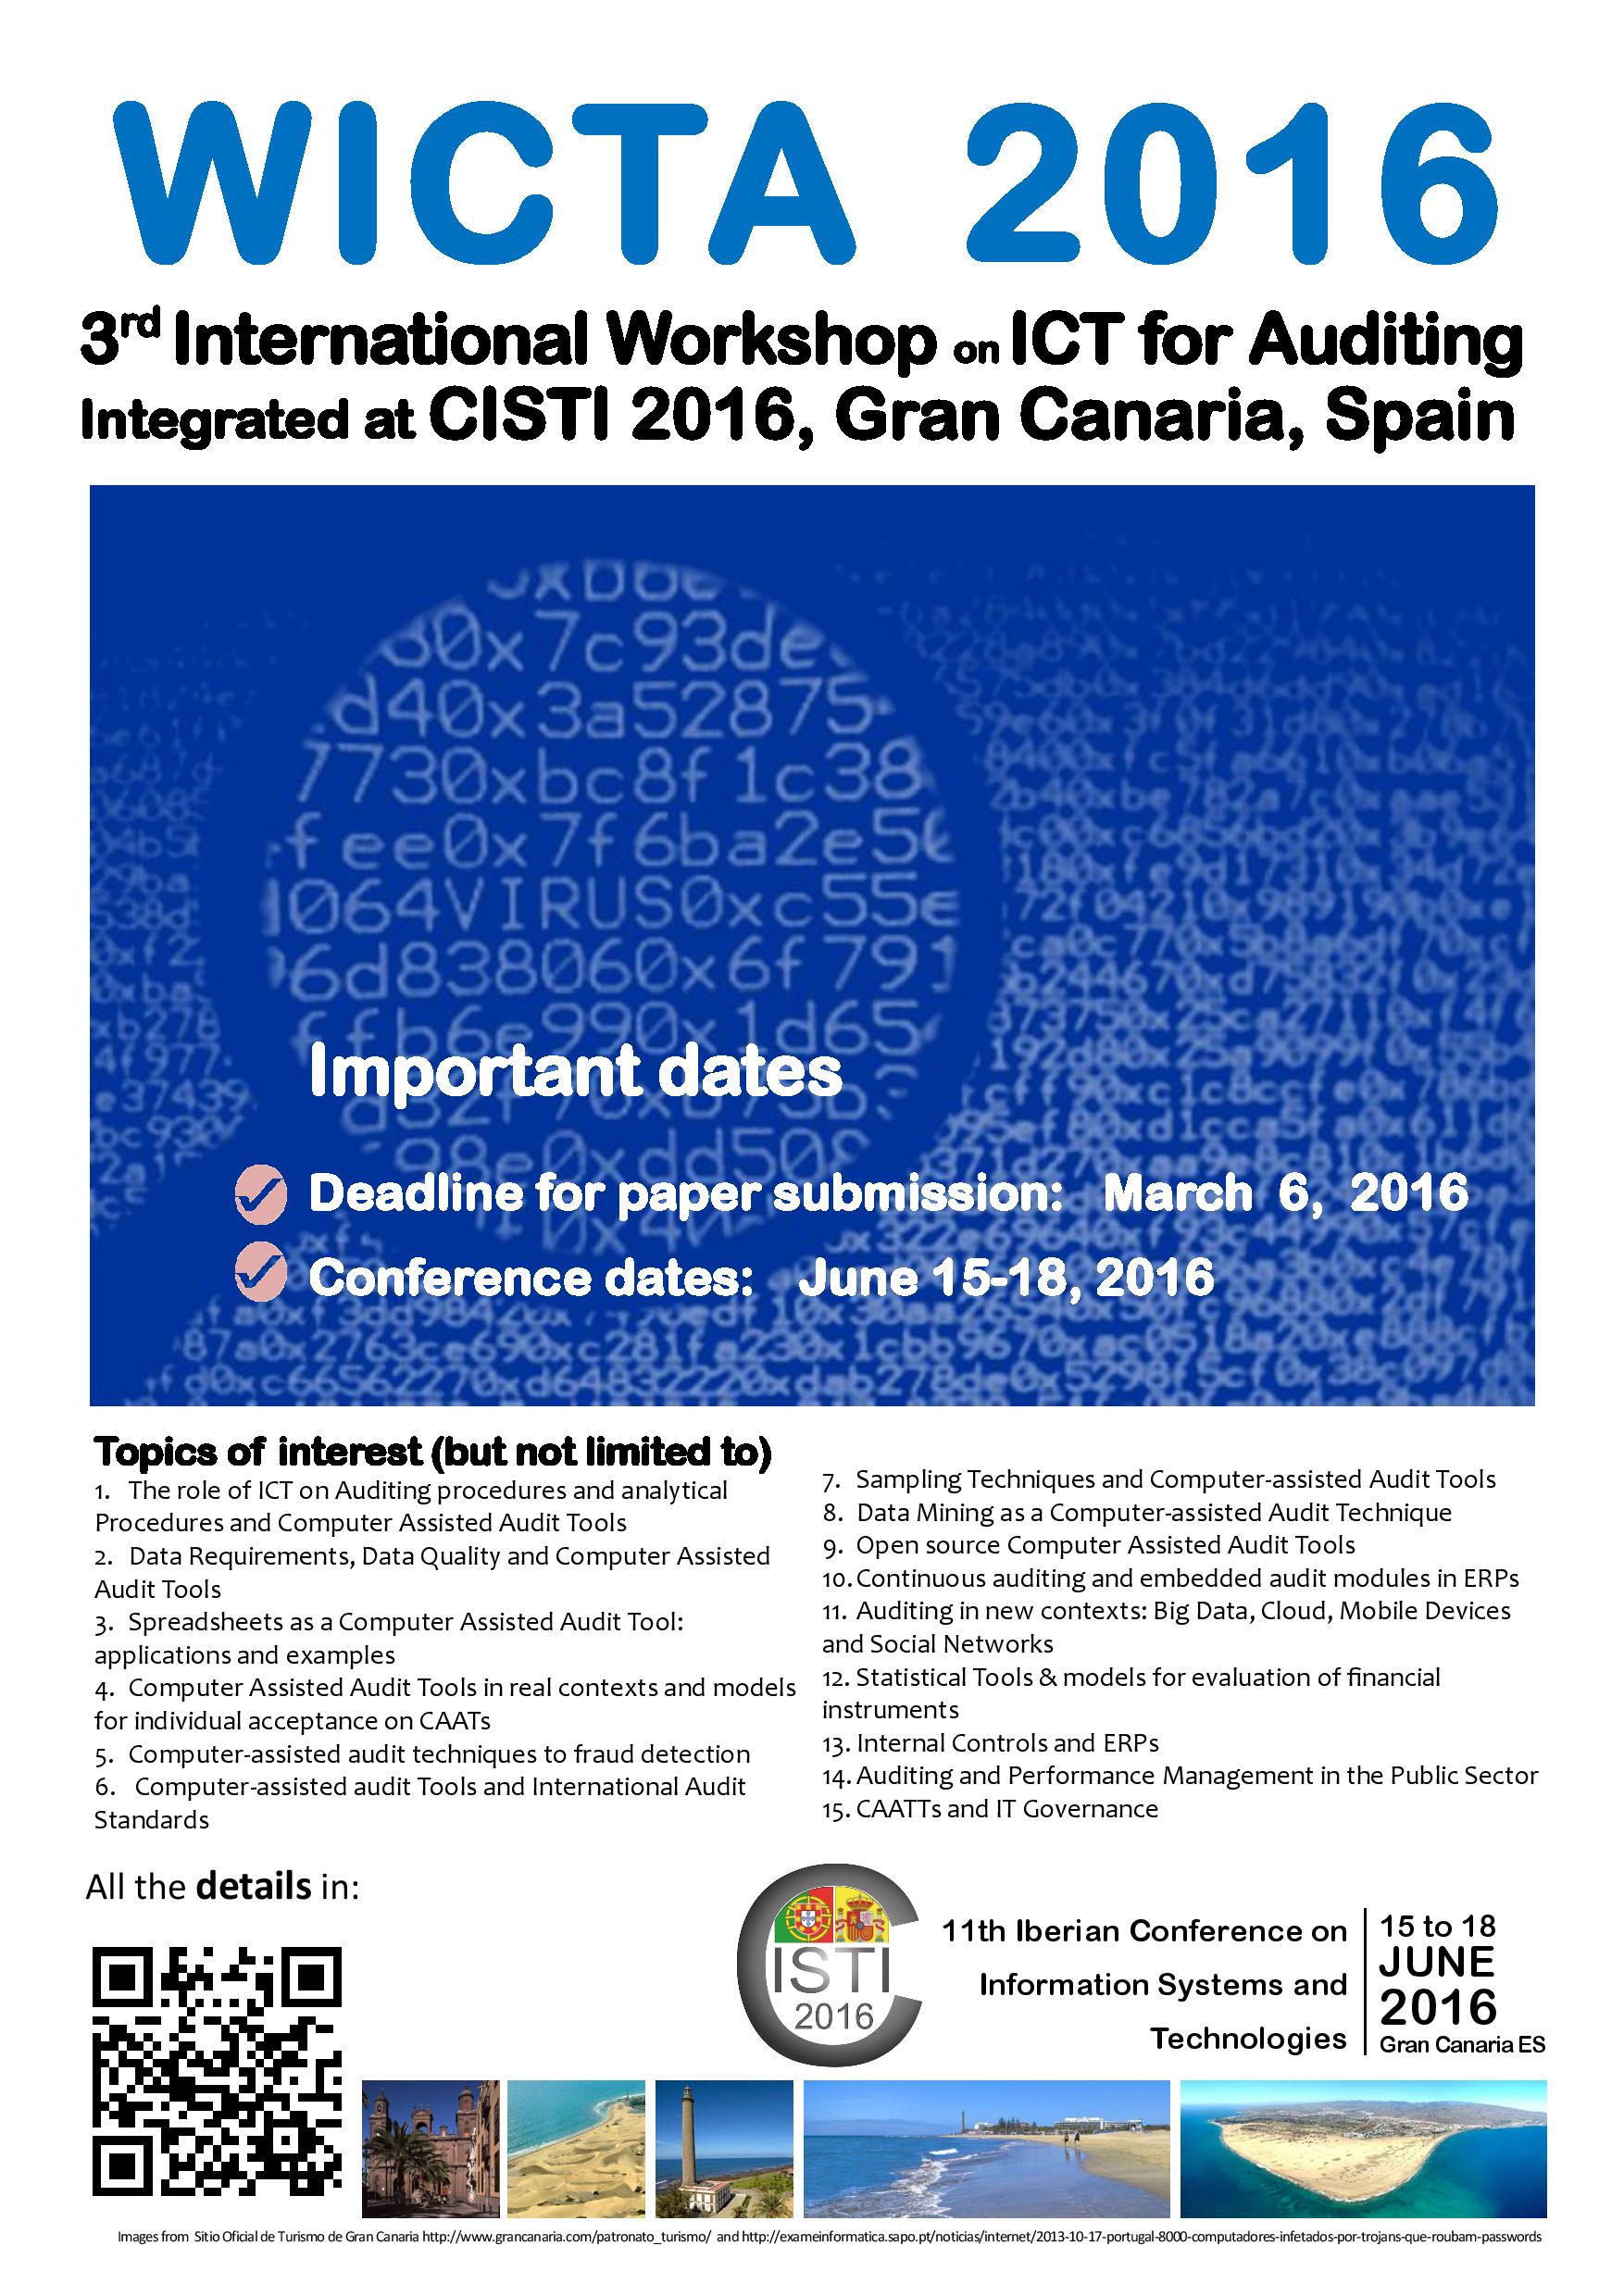 3rd International Workshop on ICT for Auditing (WICTA 2016)

This Workshop is integrate with 11th CISTI, Iberian Conference of Information Systems and Technologies. 

Publishing: Papers will be published in CD format, with an ISBN.
Published papers will be sent to EI, IEEE XPlore, INSPEC, ISI, SCOPUS and Google Scholar. Detailed and up-to-date information may be found at CISTI 2016 website: http://www.aisti.eu/cisti2016.